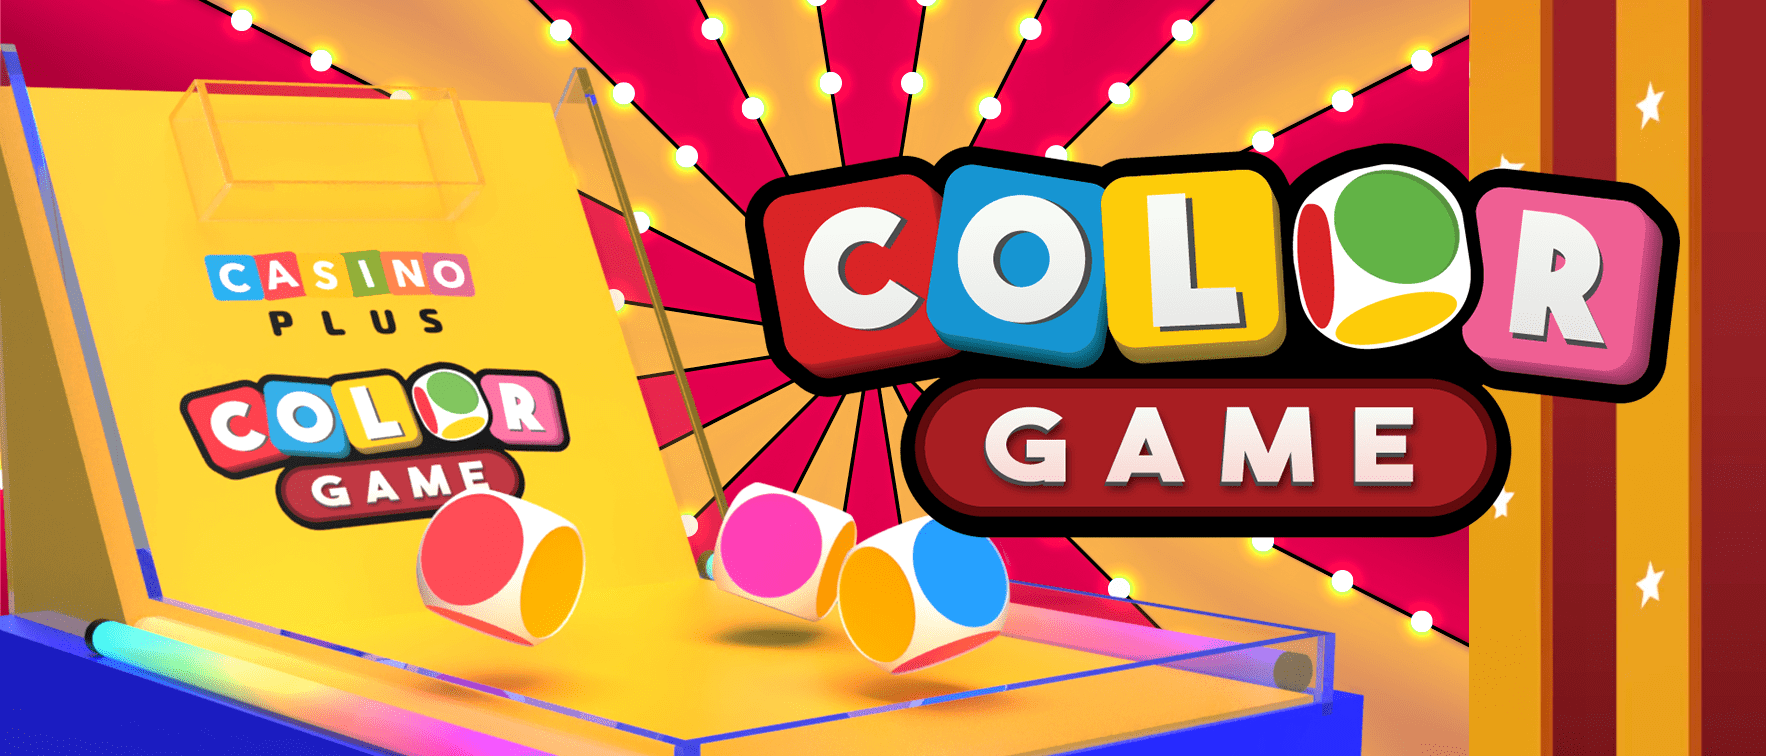 Casino Plus Color Game Betting Odds CG01-24022907 February 28 2024